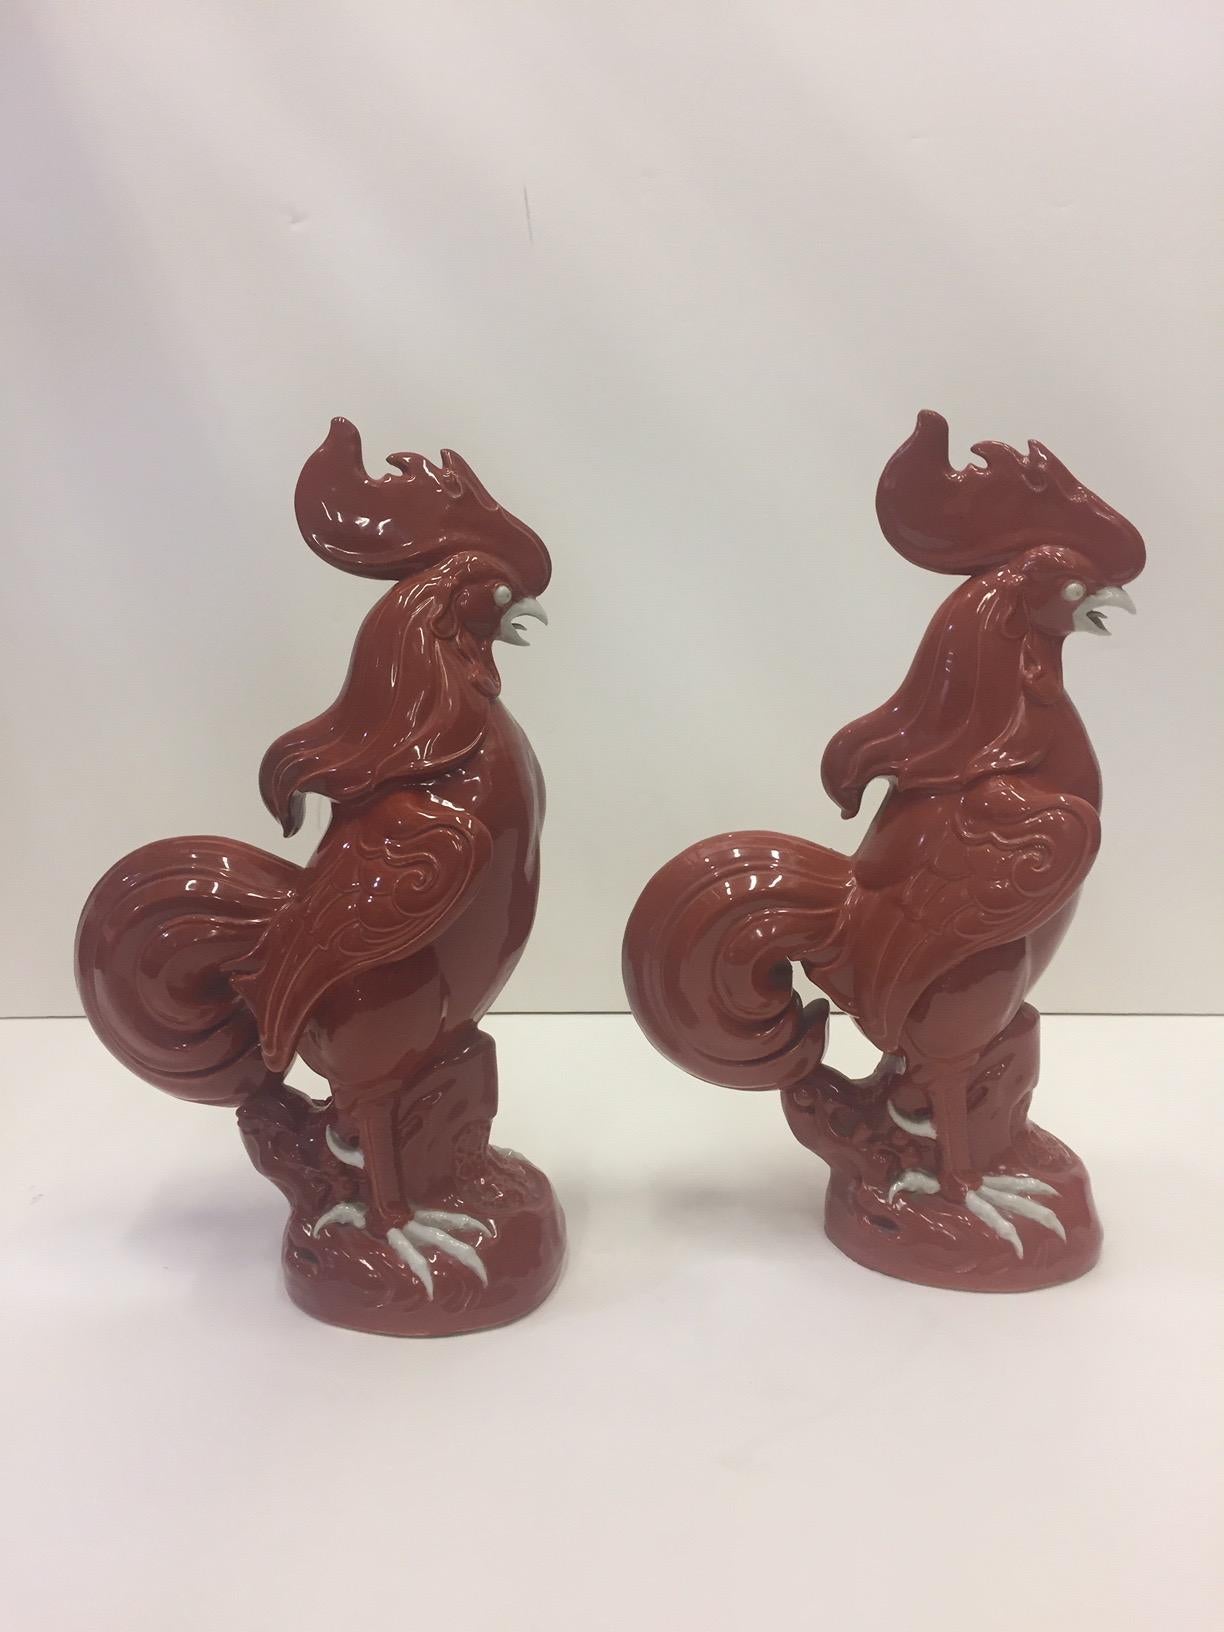 Eye-catching Chinese pair of porcelain rooster sculptures in a fabulous brick red with white accents. Great details and attitude.